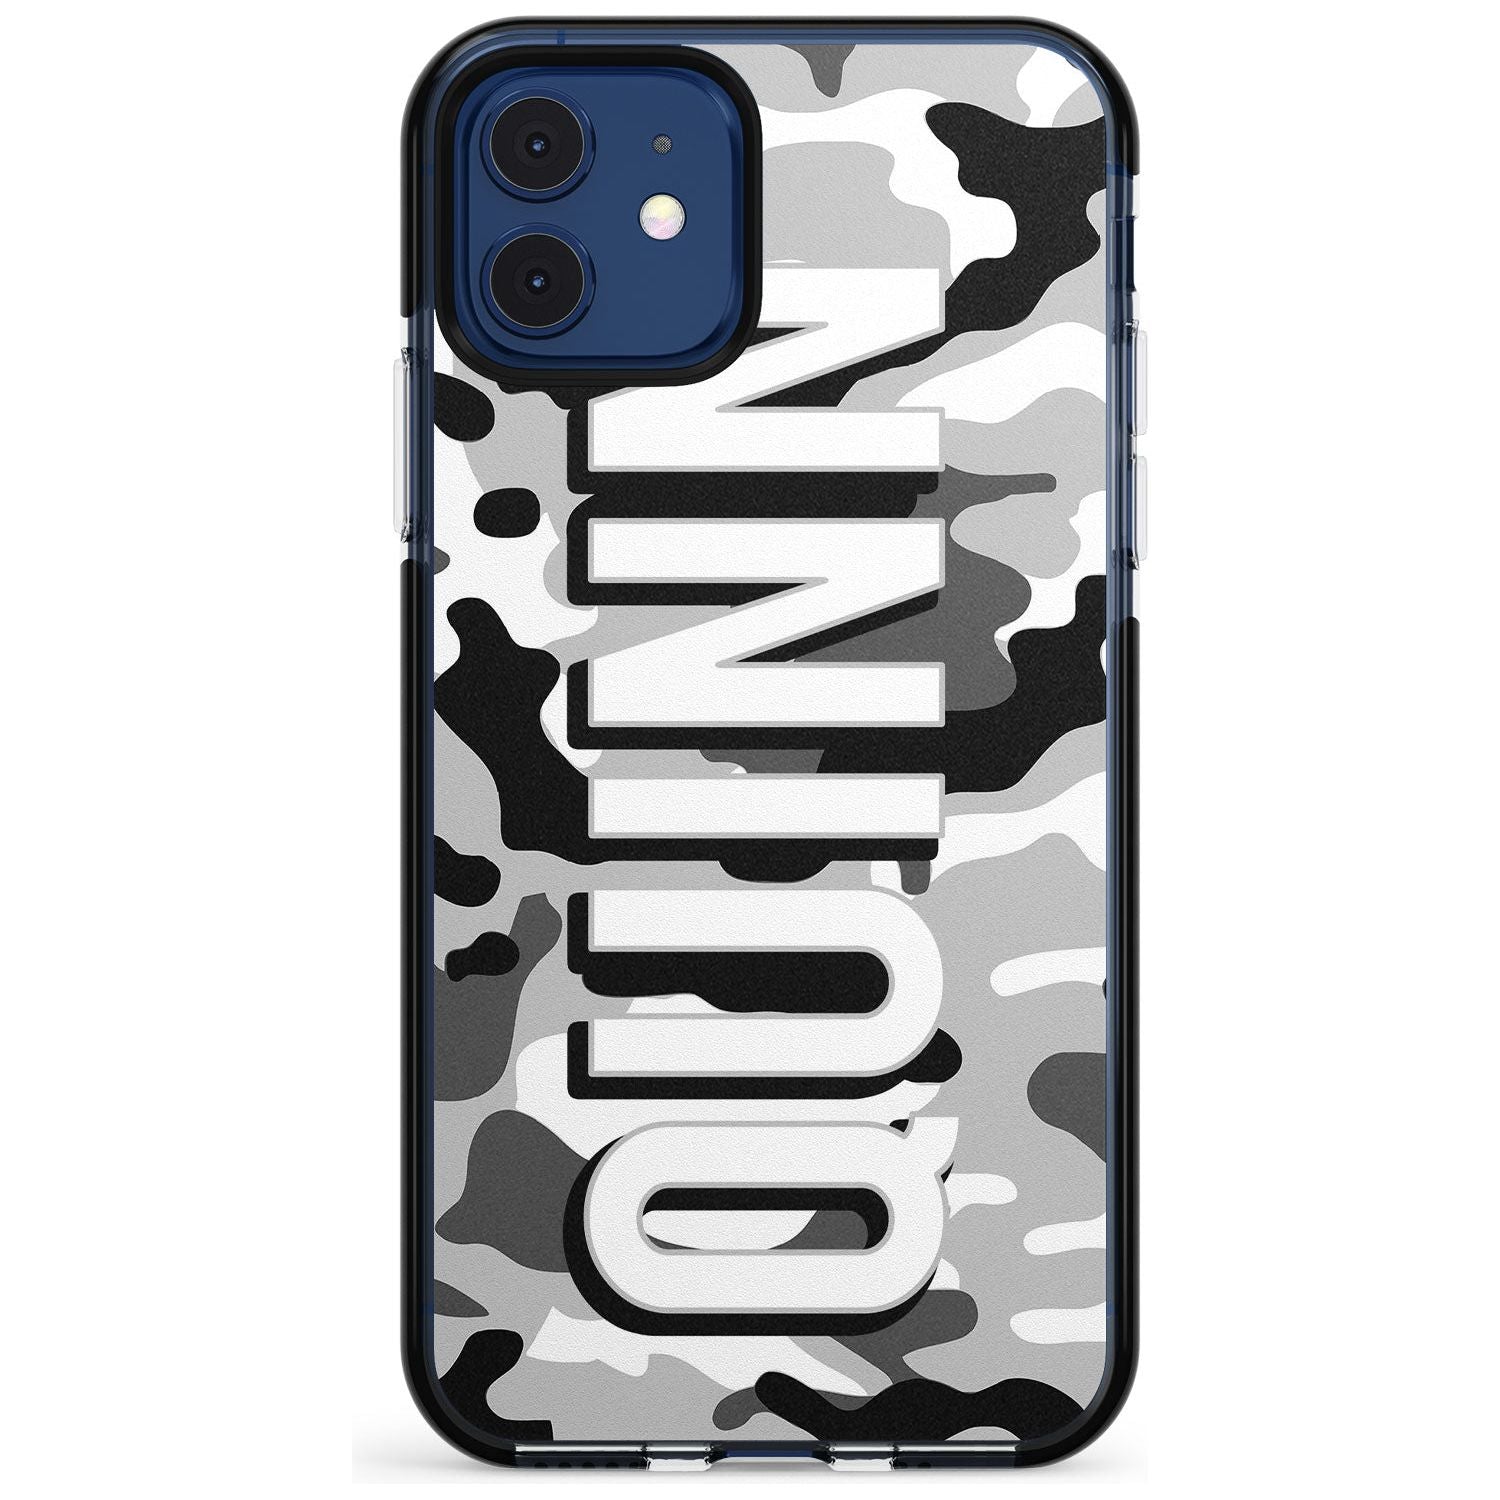 Greyscale Camo Pink Fade Impact Phone Case for iPhone 11 Pro Max